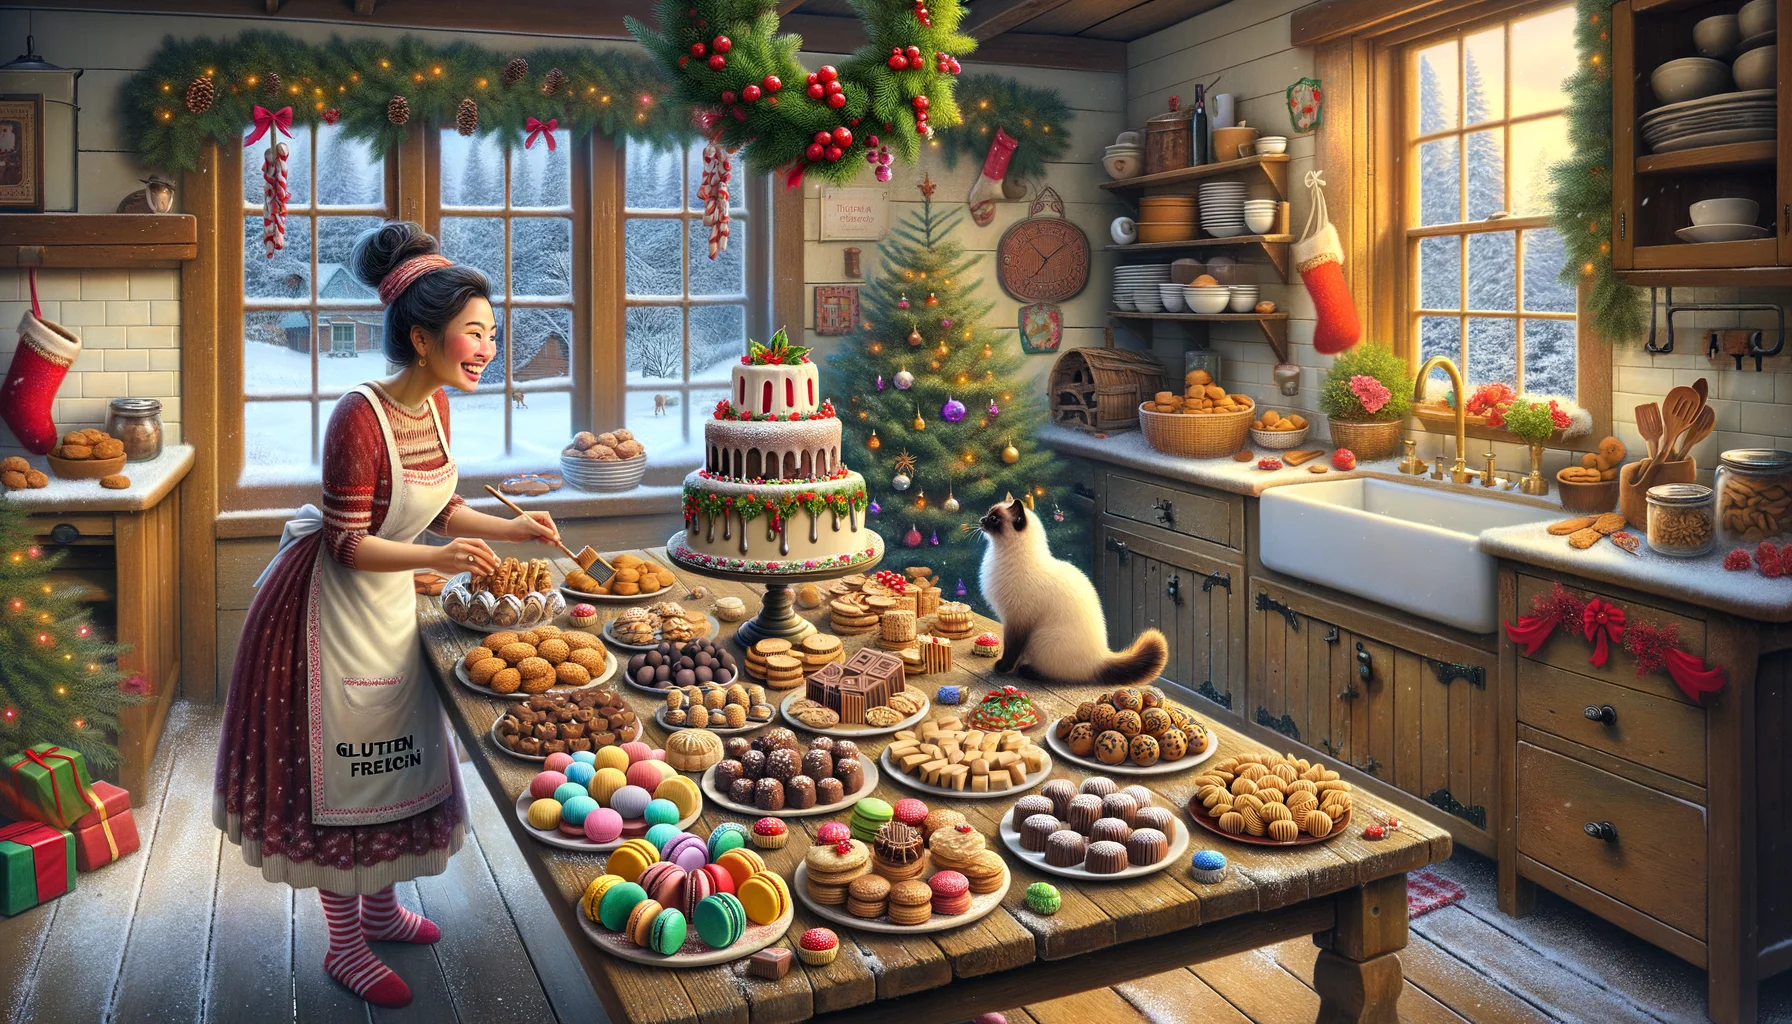 Create an amusing and realistic image showcasing a myriad of 'Gluten-Free Holiday Confections'. It's a snowy winter afternoon, and the kitchen of a rural farmhouse is warm and inviting. On a rustic wooden table sits an array of beautifully arranged holiday sweets, each labelled as 'gluten-free'. The confections include multicoloured macaroons, rich chocolate truffles, gingerbread cookies in the shapes of Christmas ornaments, and delicately frosted sugar cookies. A cheerful South Asian woman in a festive apron is seen adding the finishing touches to a Yule log cake. A Siamese cat is playfully swatting at a dangling mistletoe. The room's decorations hint at an impending merry celebration.